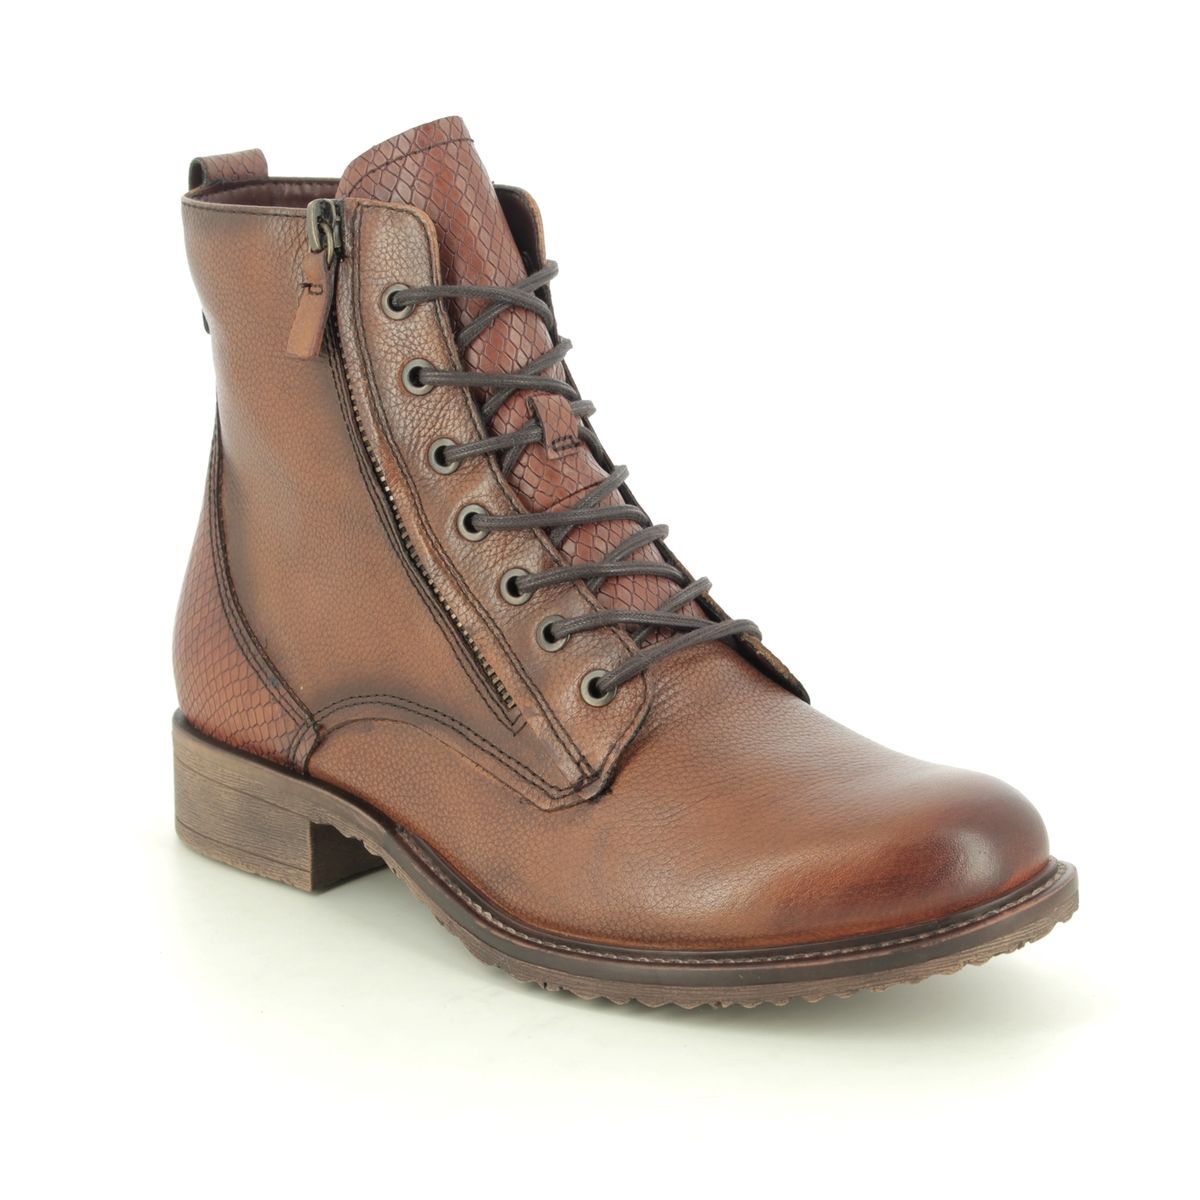 Tamaris Anouk Tan Leather  Womens Lace Up Boots 25211-25-378 In Size 38 In Plain Tan Leather